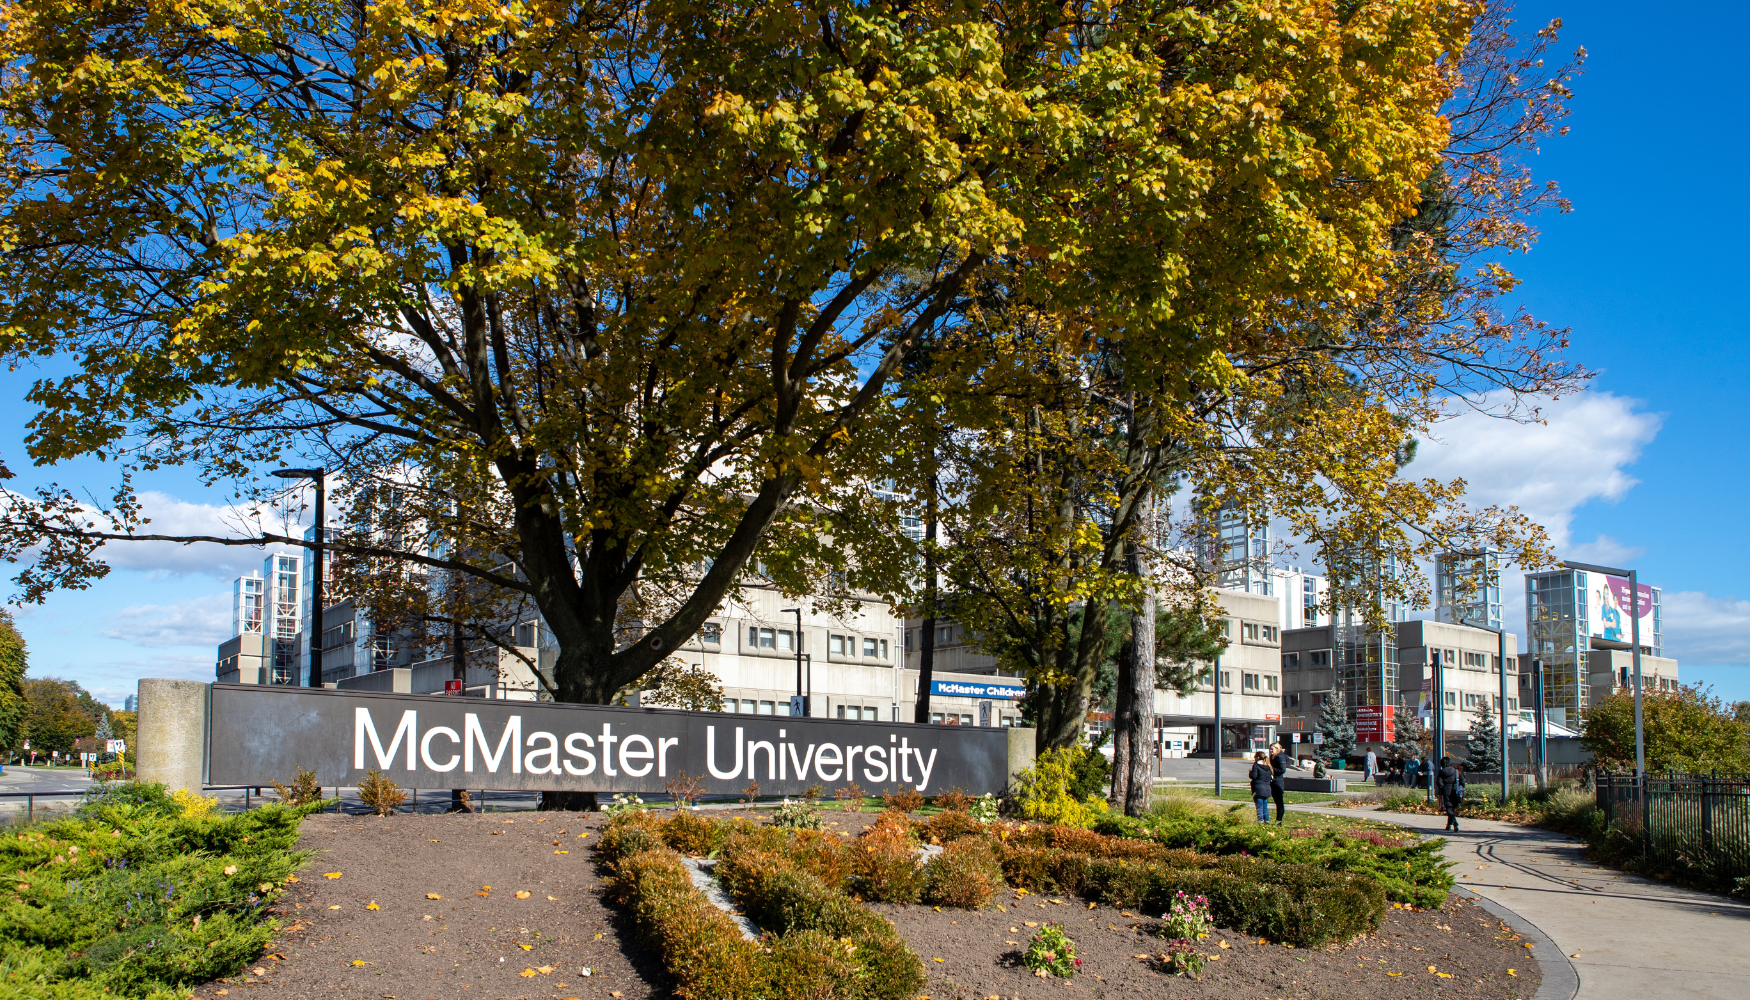 McMaster University sign in front of a tree and building